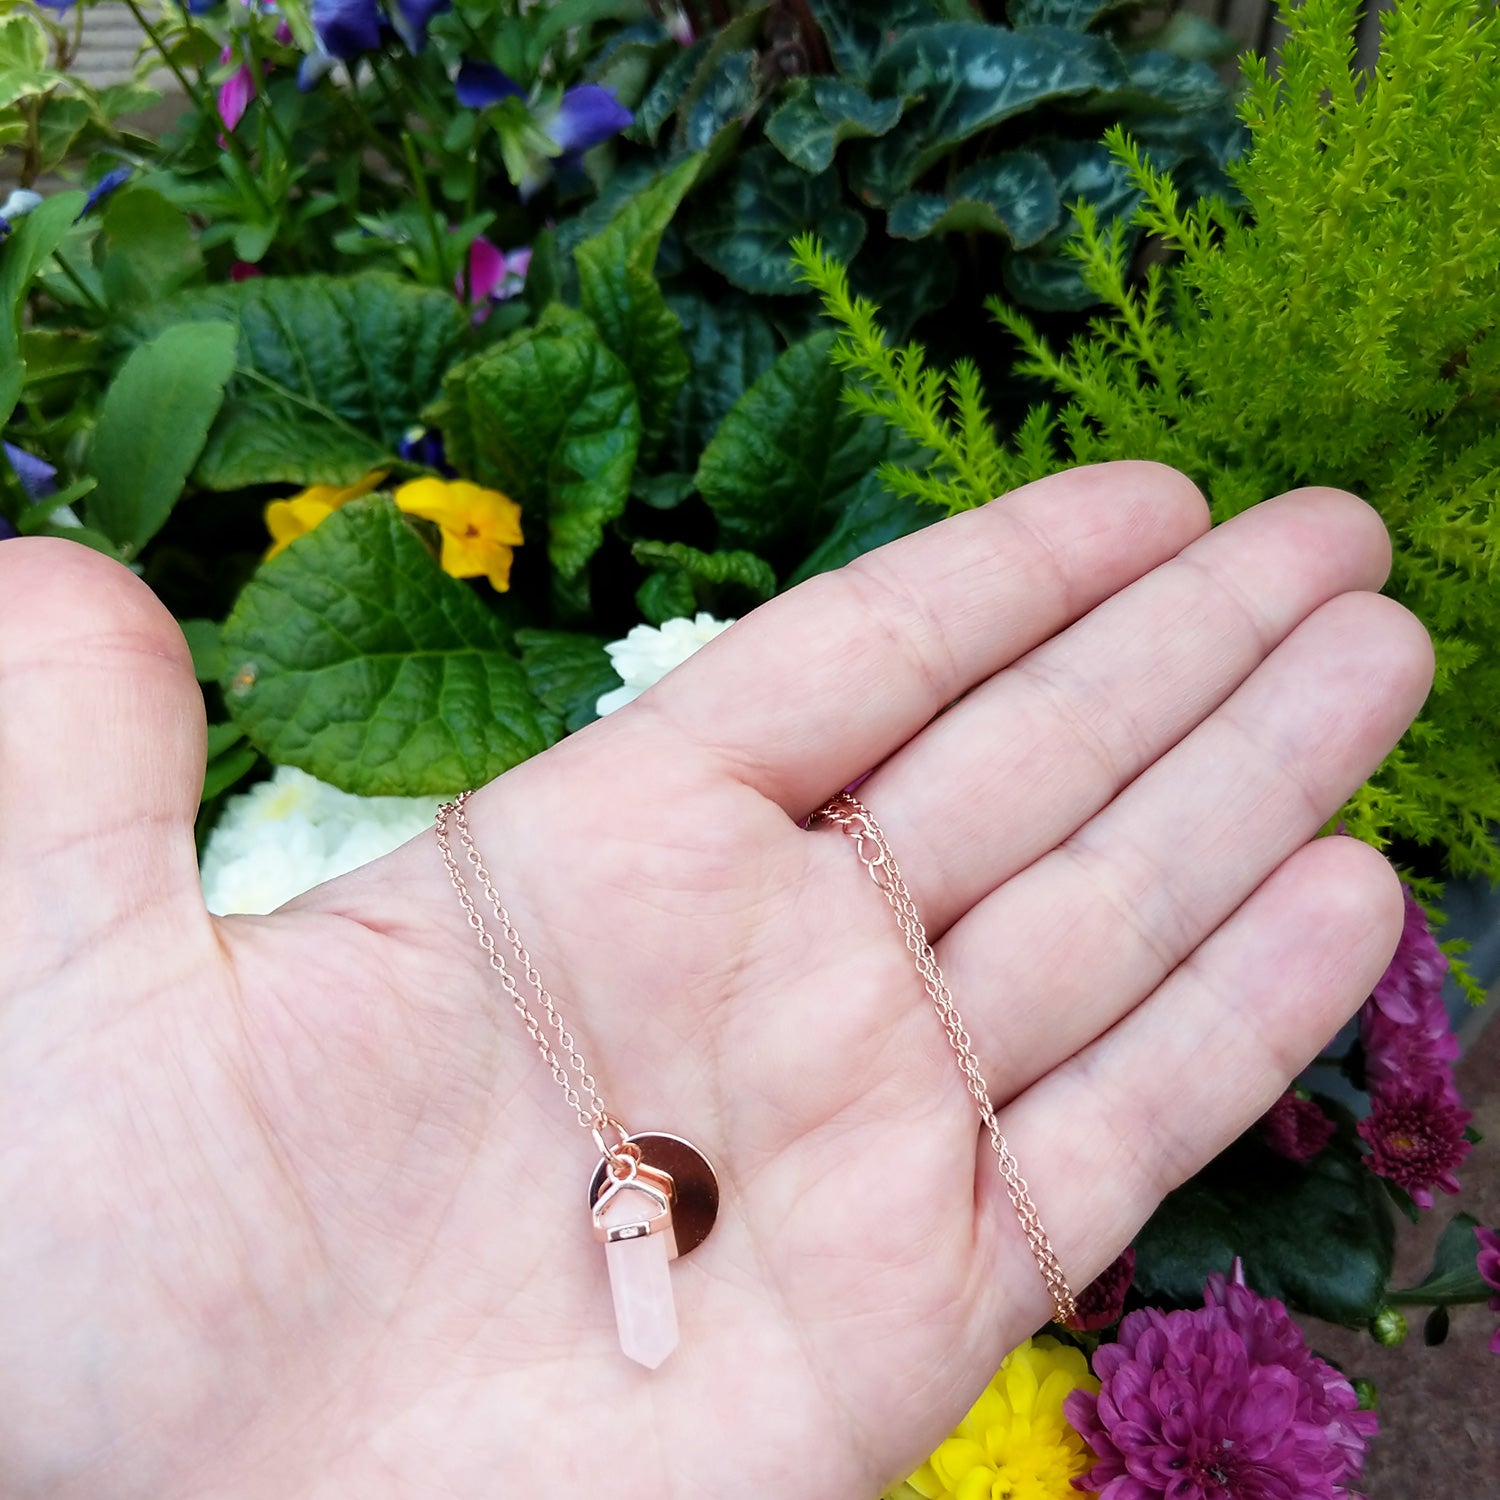 rose gold pendant necklace in hand for scale